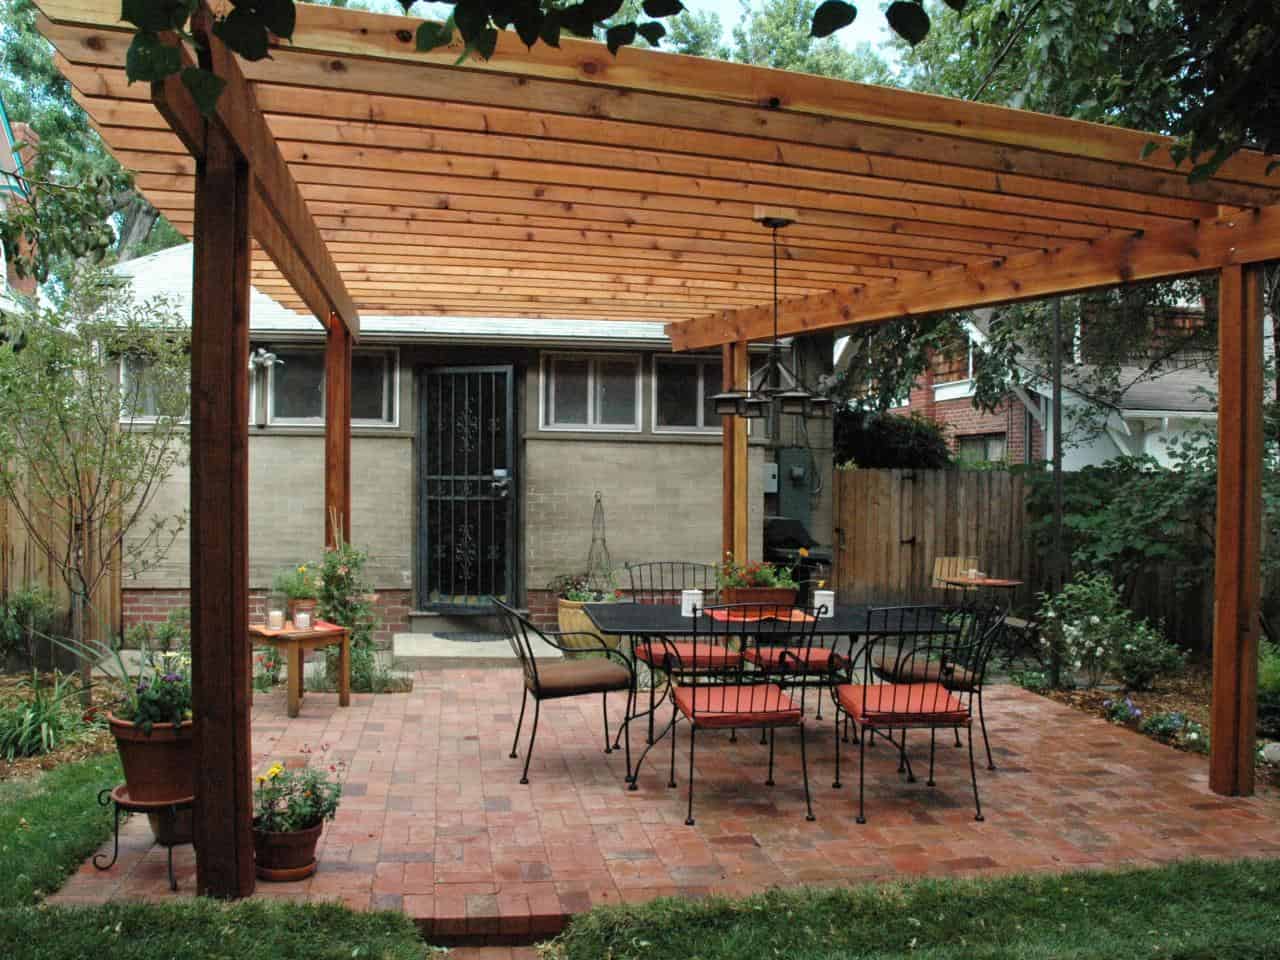 Easy DIY pergola plans to make by yourself.